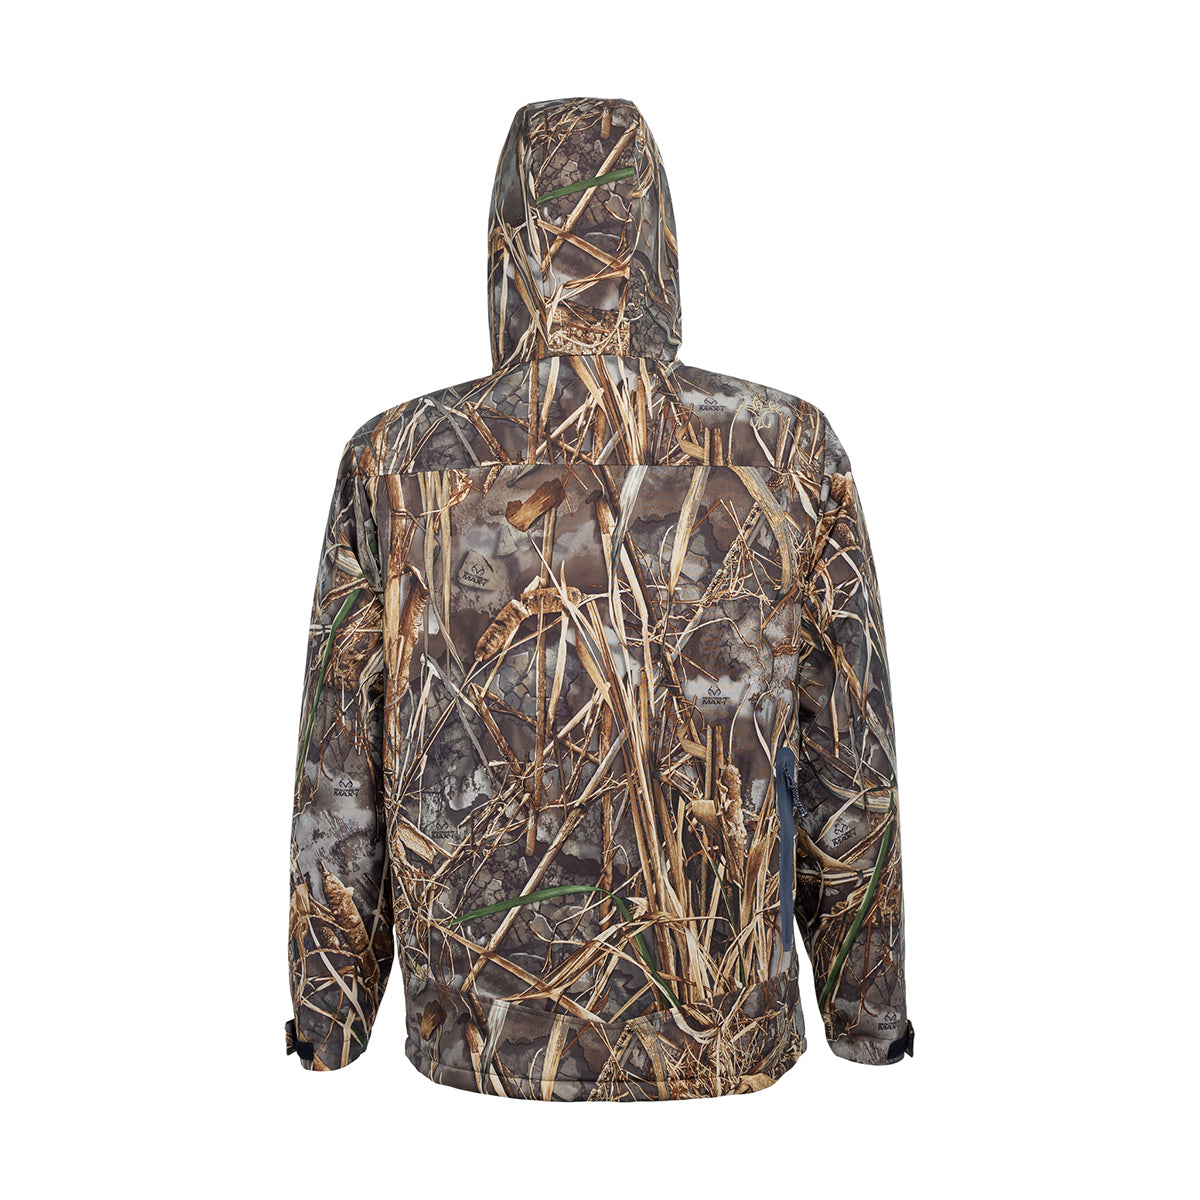 Outbound Insulated Jacket | Insulated Jacket | Sportsman Gear